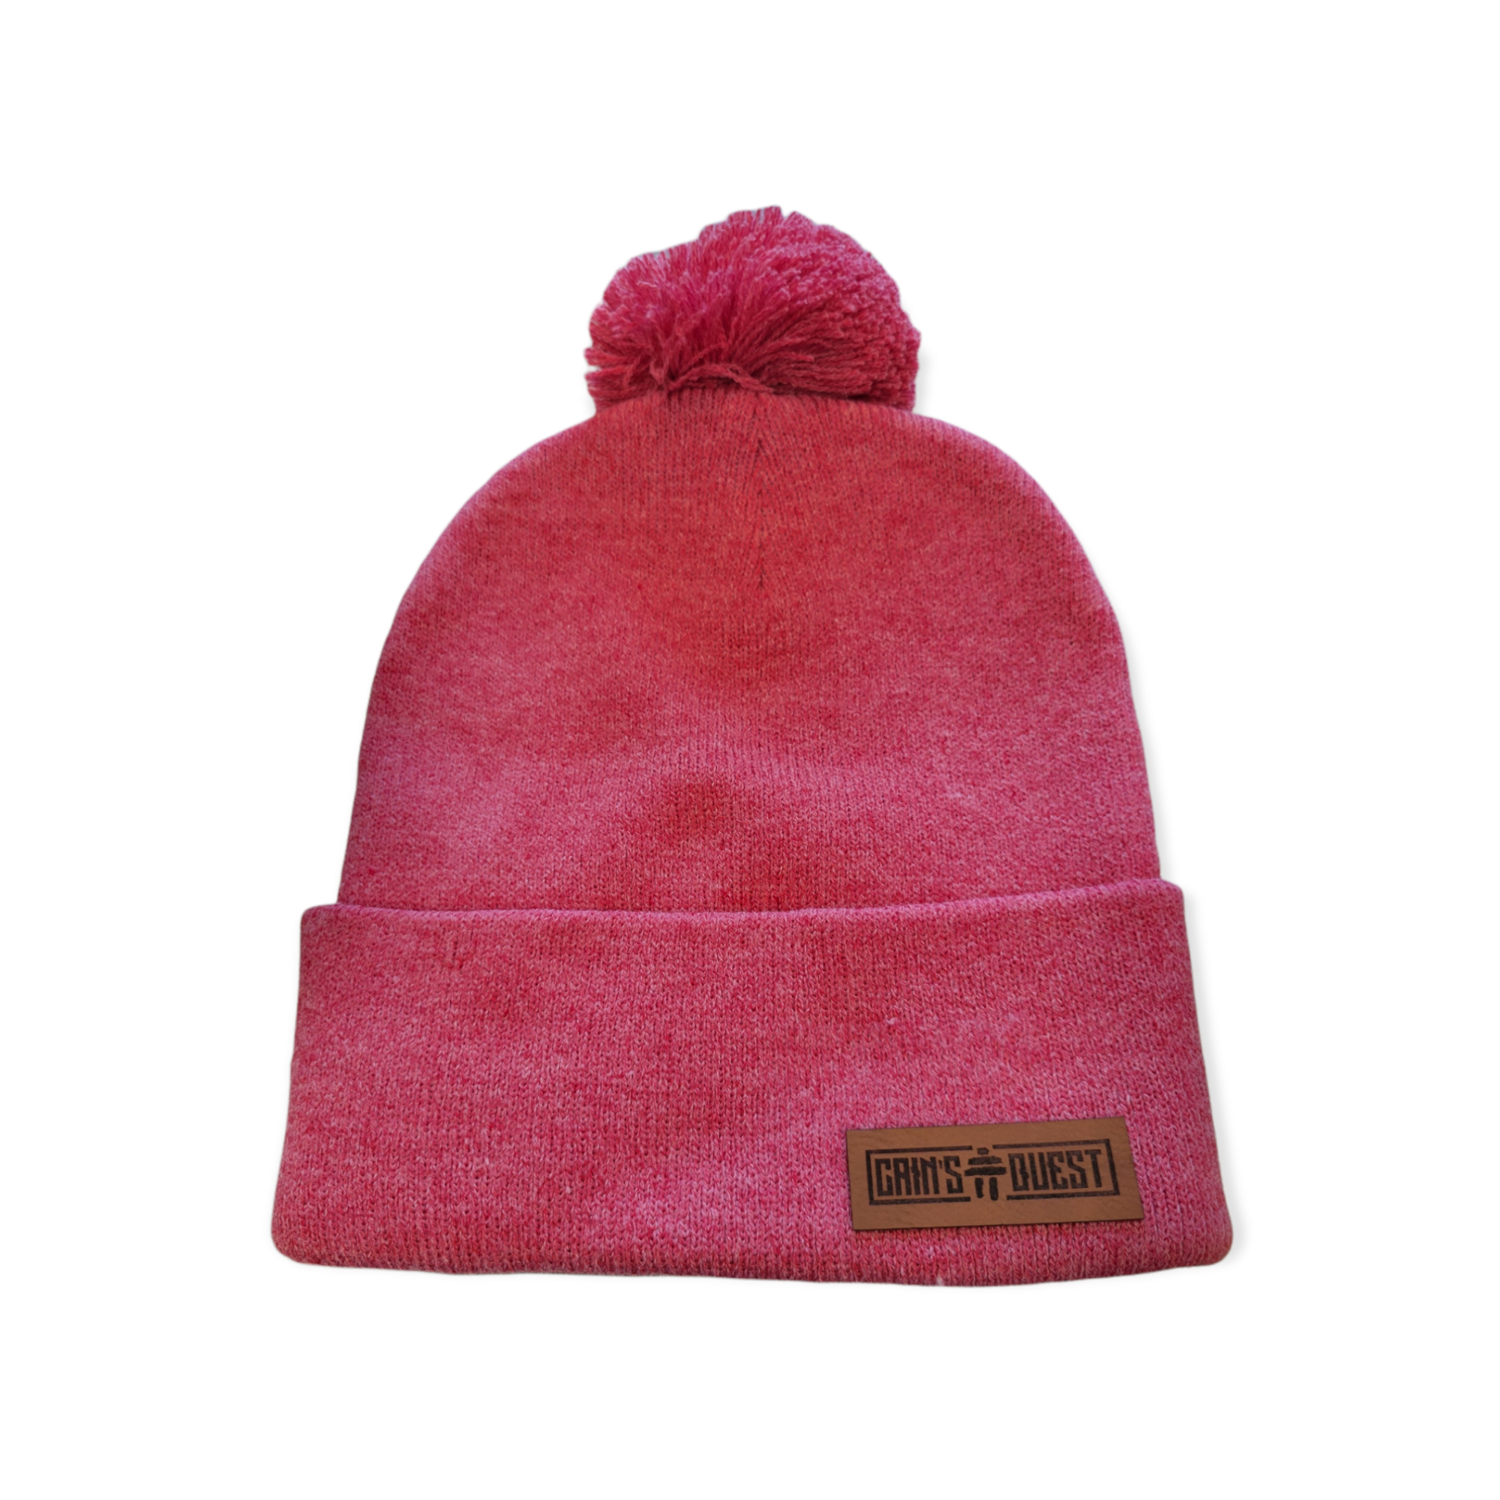 Cain's Quest toque with brim and tassel